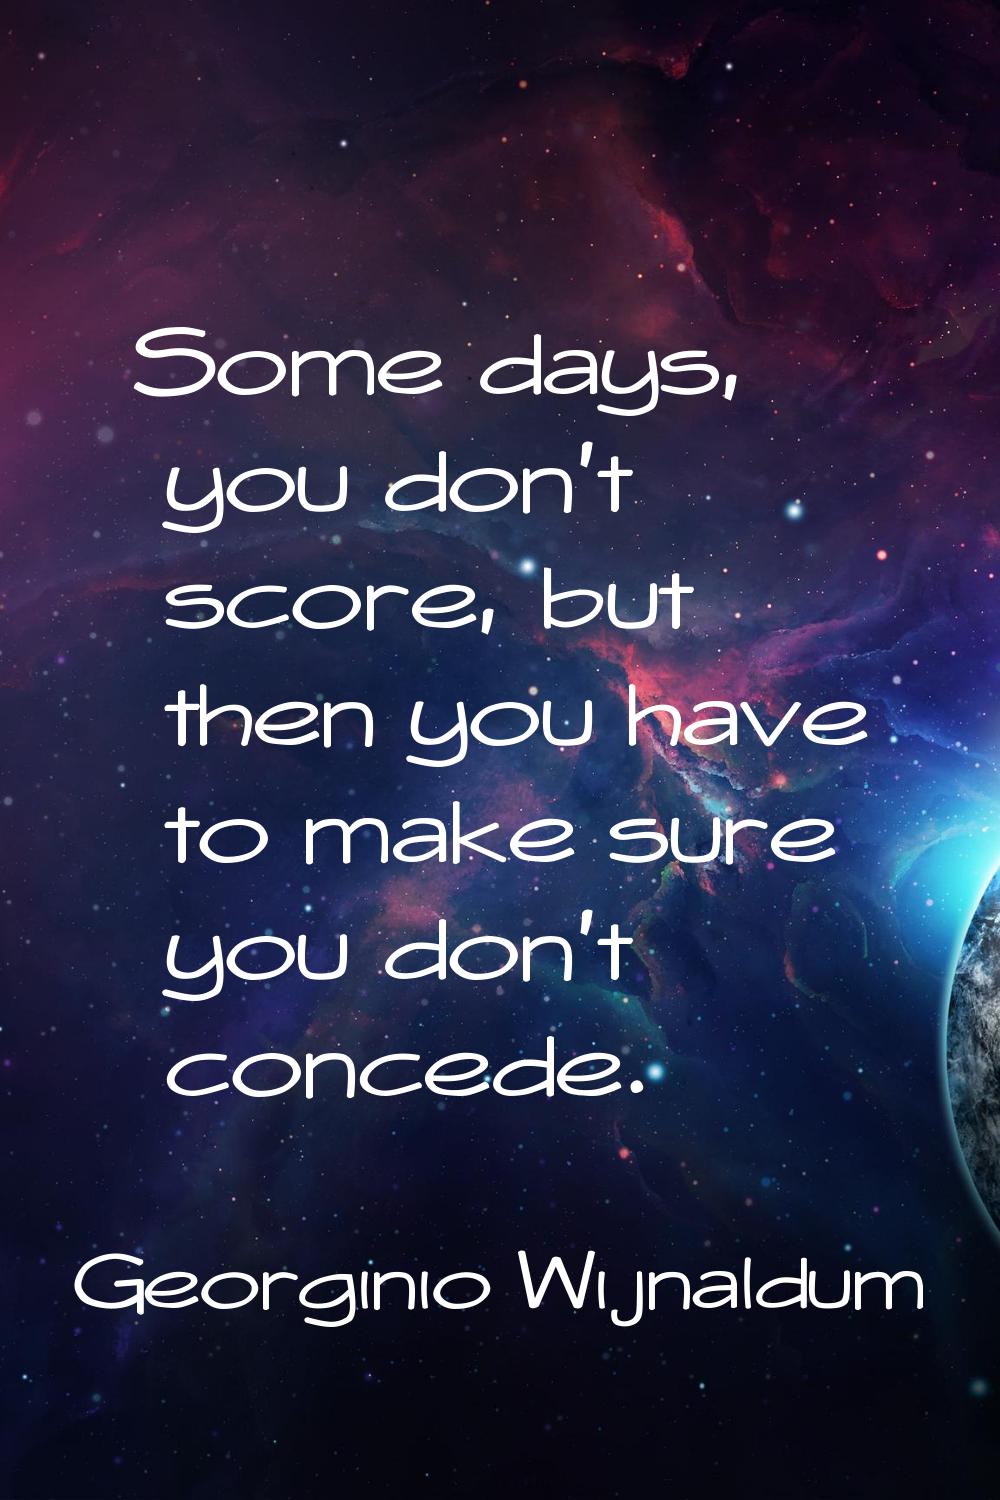 Some days, you don't score, but then you have to make sure you don't concede.